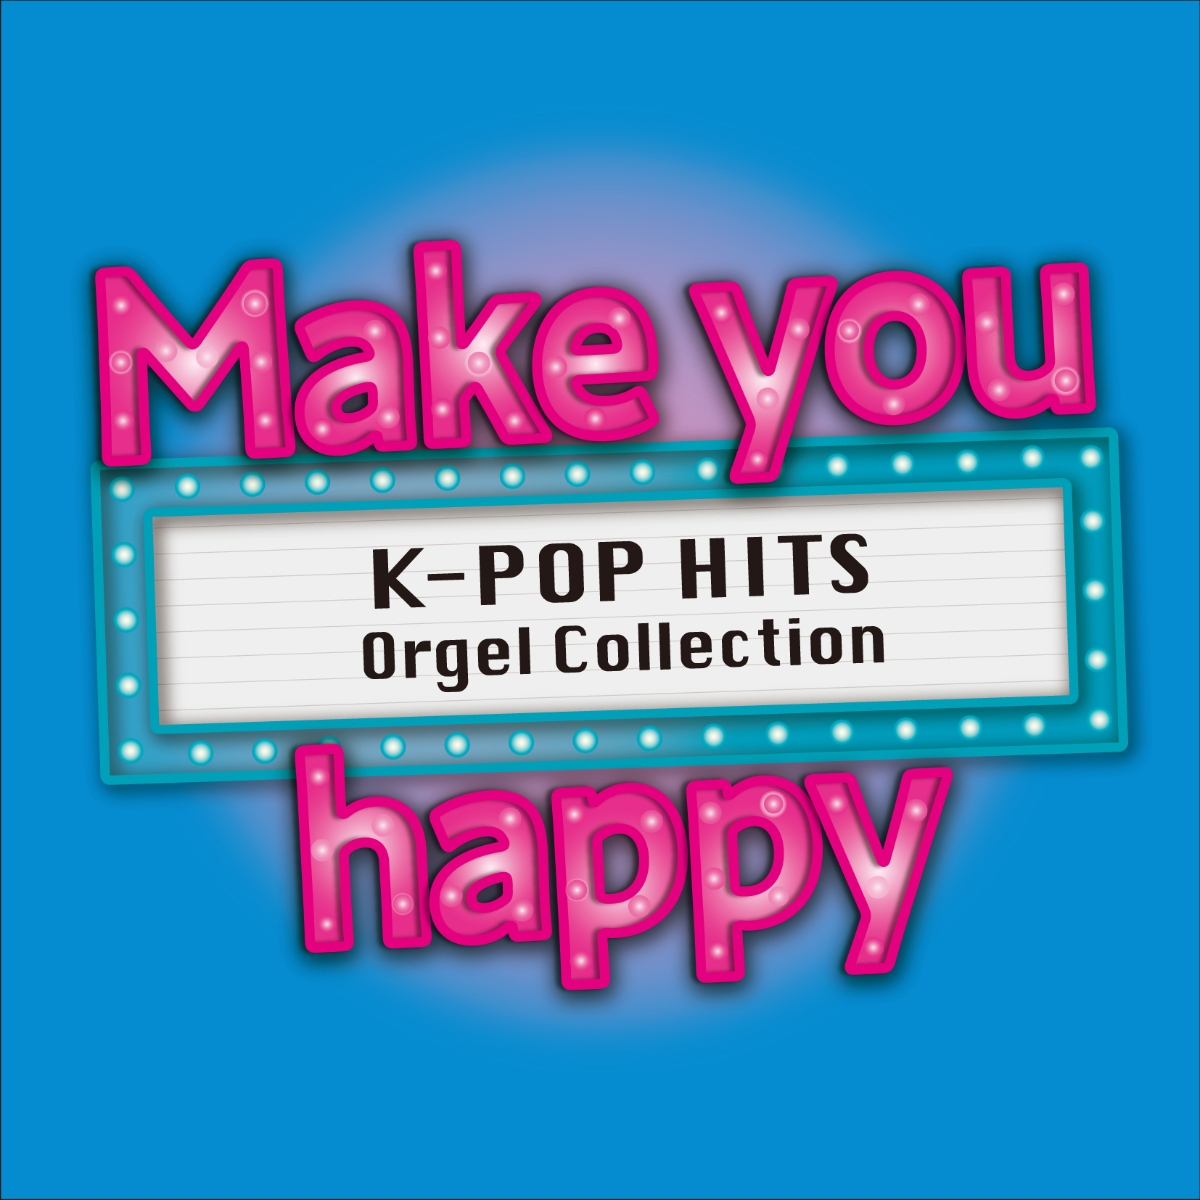 Make you happy 〜K-POP HITS Orgel Collection〜画像